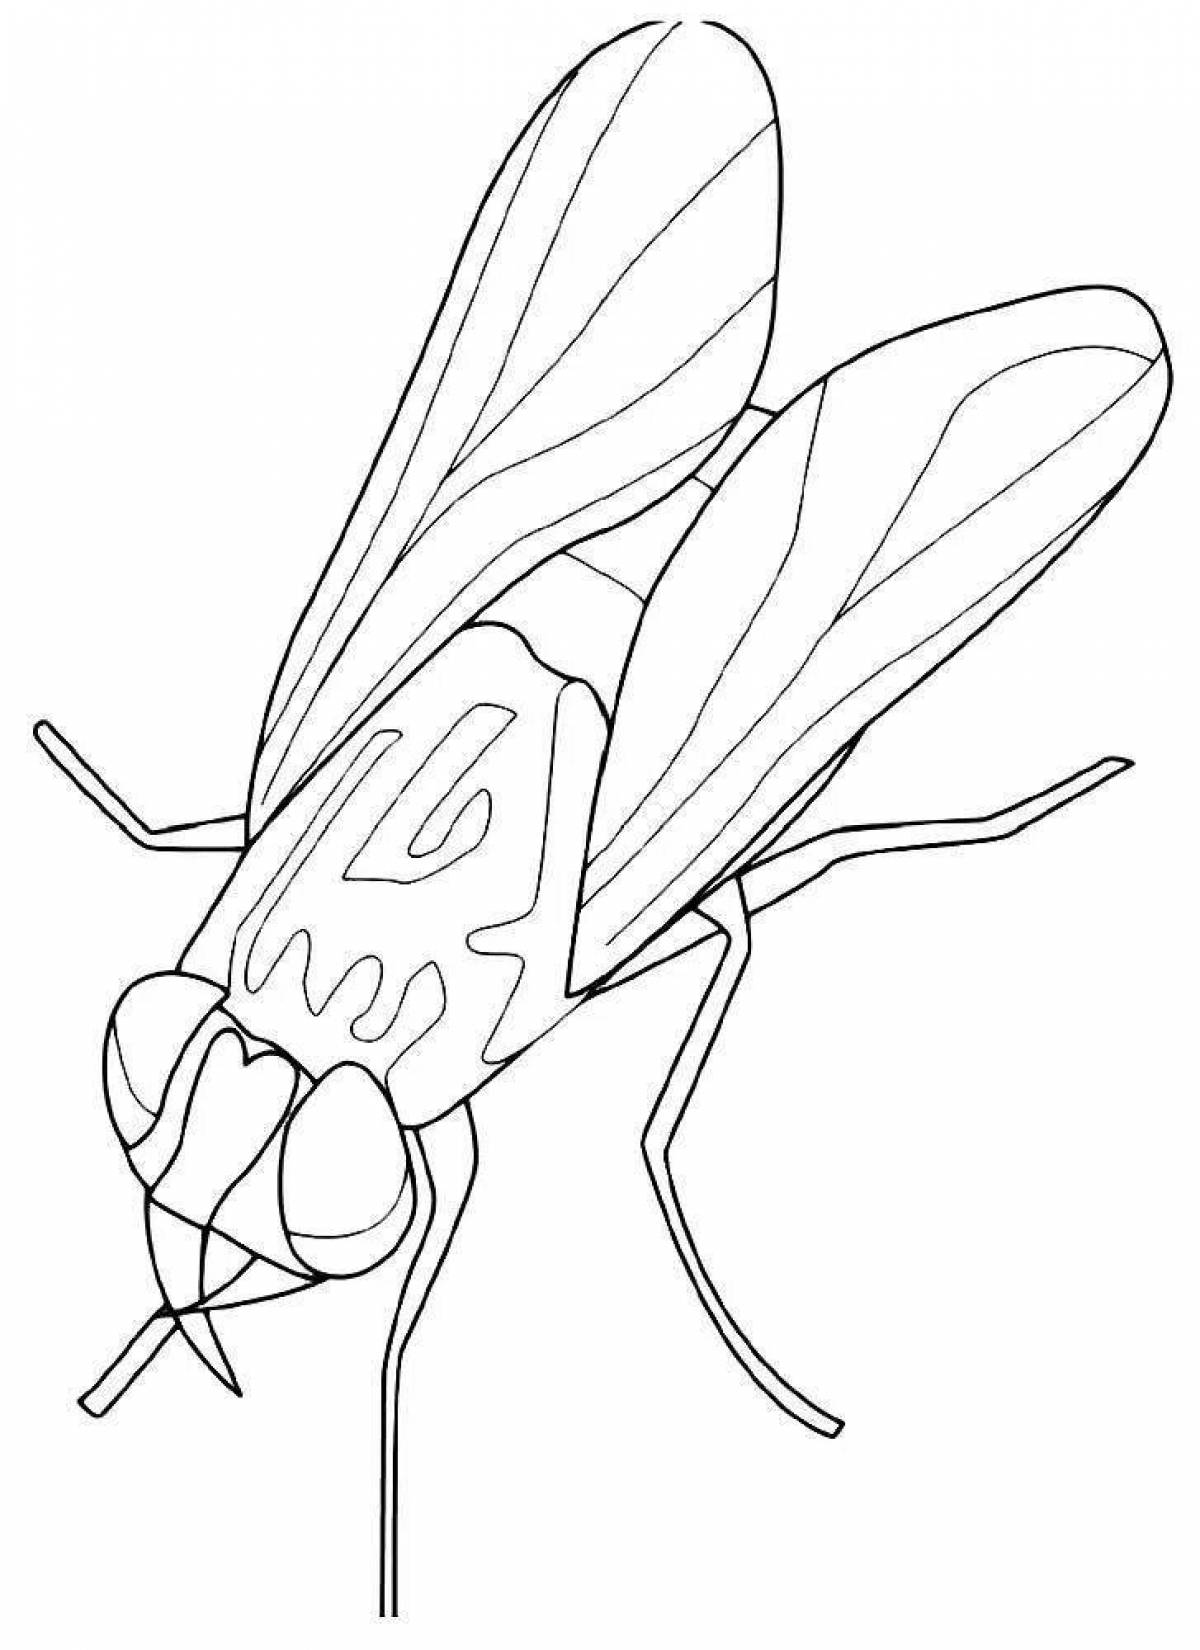 Shiny fly coloring book for kids